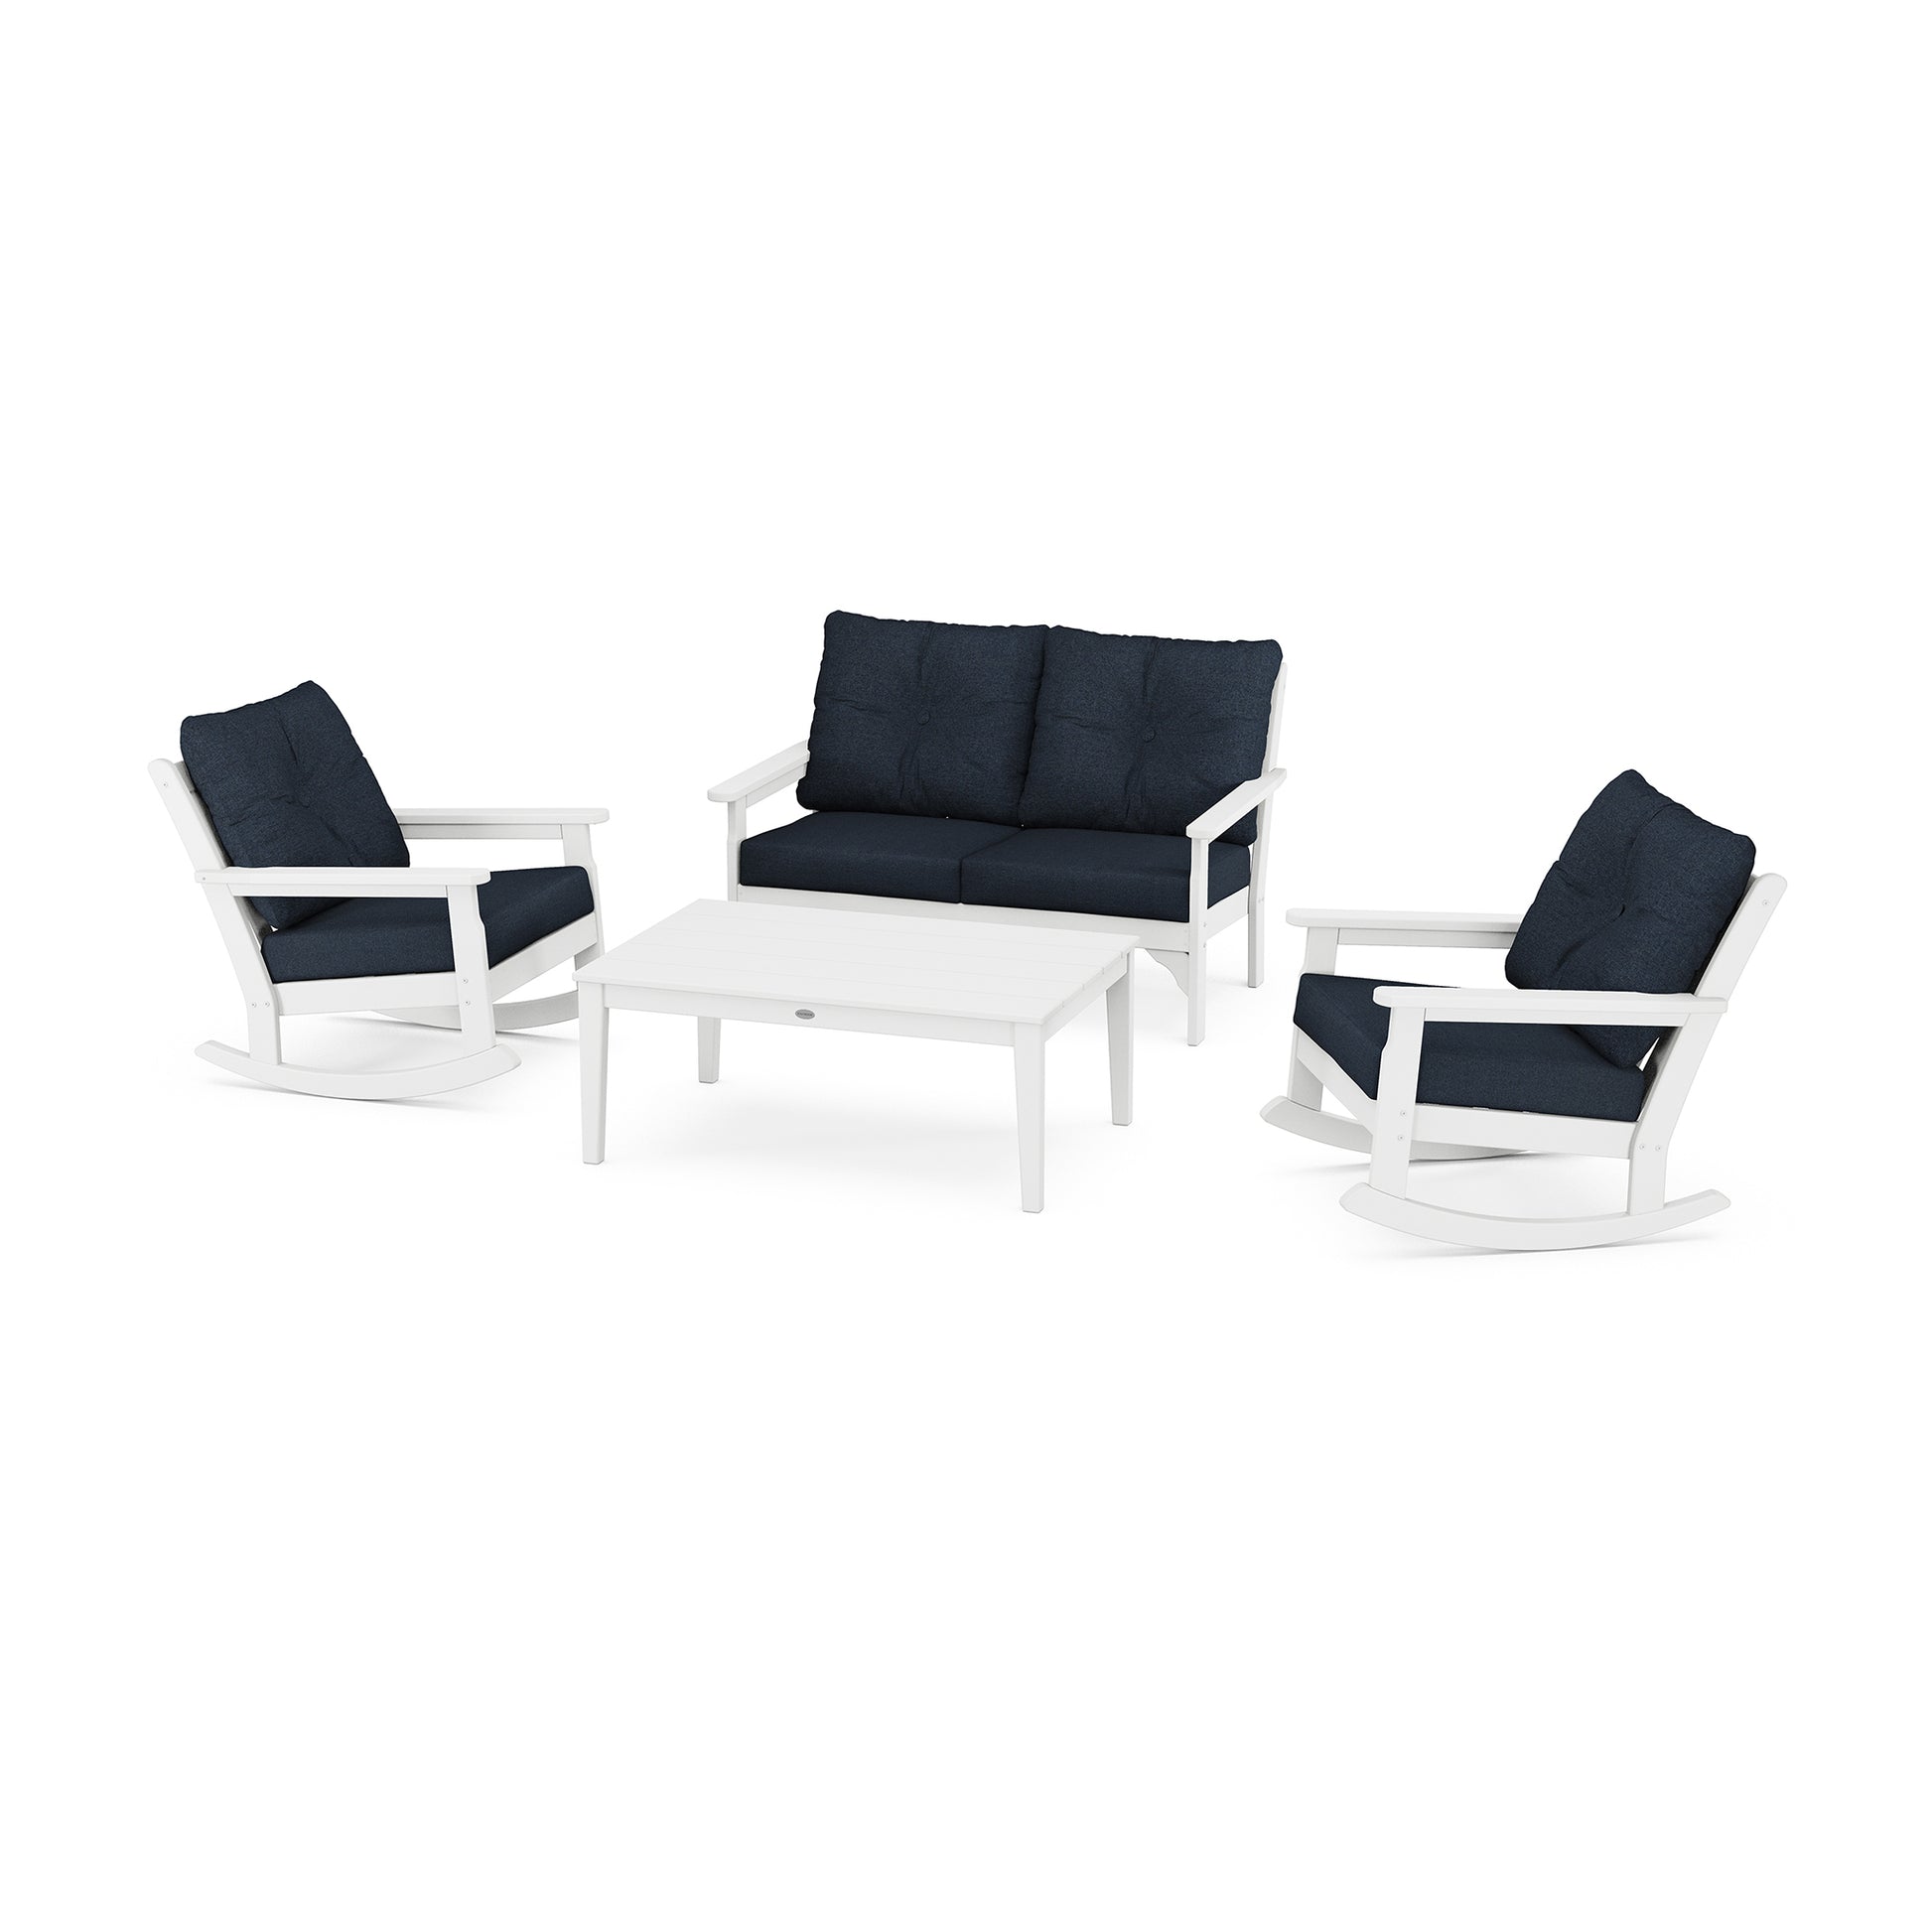 Three-piece luxury outdoor furniture set featuring two POLYWOOD Vineyard rocking chairs and one POLYWOOD Vineyard loveseat, all with navy blue cushions, made from POLYWOOD® lumber frames, isolated on a white background.